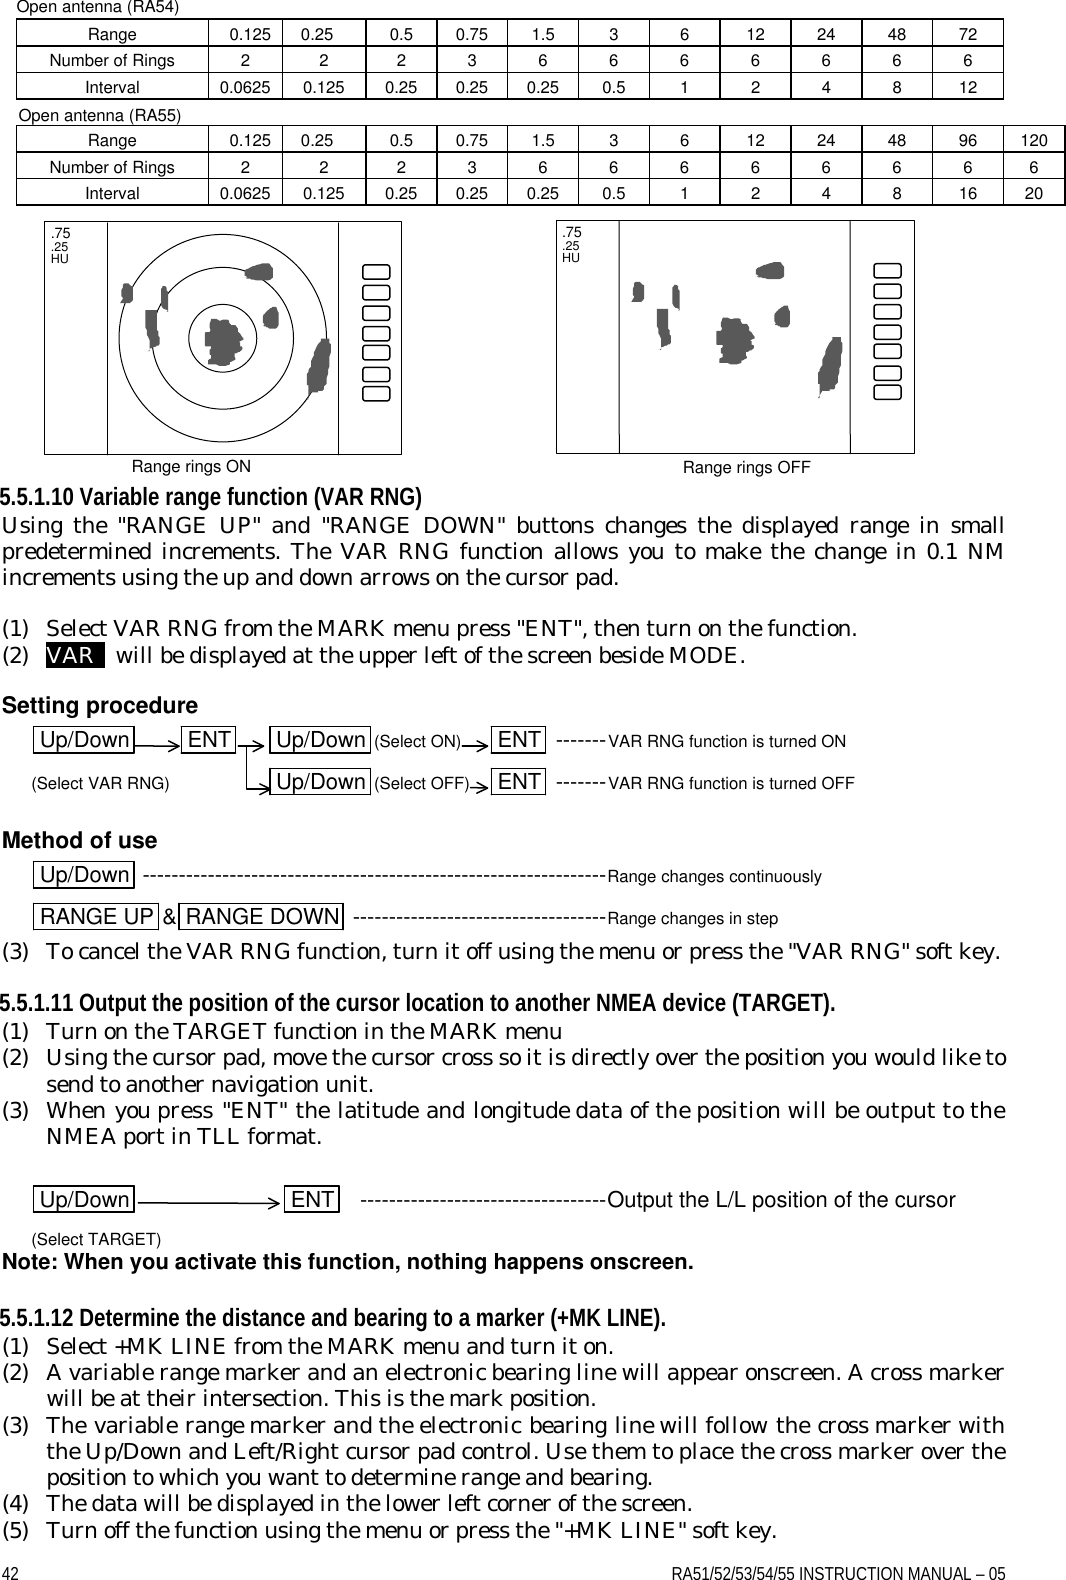 42    RA51/52/53/54/55 INSTRUCTION MANUAL – 05 Open antenna (RA54) Range 0.125  0.25 0.5 0.75 1.5 3 6 12 24 48 72 Number of Rings 2 2 2 3 6 6 6 6 6 6 6 Interval 0.0625 0.125 0.25 0.25 0.25 0.5 1 2 4 8 12 Open antenna (RA55) Range 0.125  0.25 0.5 0.75 1.5 3 6 12 24 48 96 120 Number of Rings 2 2 2 3 6 6 6 6 6 6 6 6 Interval 0.0625 0.125 0.25 0.25 0.25 0.5 1 2 4 8 16 20            5.5.1.10 Variable range function (VAR RNG) Using the &quot;RANGE UP&quot; and &quot;RANGE DOWN&quot; buttons changes the displayed range in  small predetermined increments. The VAR RNG function allows you to make the change in 0.1 NM increments using the up and down arrows on the cursor pad.  (1) Select VAR RNG from the MARK menu press &quot;ENT&quot;, then turn on the function. (2) VAR   will be displayed at the upper left of the screen beside MODE.  Setting procedure Up/Down  ENT  Up/Down (Select ON) ENT -------VAR RNG function is turned ON (Select VAR RNG)  Up/Down (Select OFF) ENT -------VAR RNG function is turned OFF  Method of use Up/Down ----------------------------------------------------------------Range changes continuously RANGE UP &amp;RANGE DOWN -----------------------------------Range changes in step (3) To cancel the VAR RNG function, turn it off using the menu or press the &quot;VAR RNG&quot; soft key.  5.5.1.11 Output the position of the cursor location to another NMEA device (TARGET). (1) Turn on the TARGET function in the MARK menu (2) Using the cursor pad, move the cursor cross so it is directly over the position you would like to send to another navigation unit. (3) When you press &quot;ENT&quot; the latitude and longitude data of the position will be output to the NMEA port in TLL format.  Up/Down     ENT  ----------------------------------Output the L/L position of the cursor (Select TARGET) Note: When you activate this function, nothing happens onscreen.  5.5.1.12 Determine the distance and bearing to a marker (+MK LINE). (1) Select +MK LINE from the MARK menu and turn it on. (2) A variable range marker and an electronic bearing line will appear onscreen. A cross marker will be at their intersection. This is the mark position. (3) The variable range marker and the electronic bearing line will follow the cross marker with the Up/Down and Left/Right cursor pad control. Use them to place the cross marker over the position to which you want to determine range and bearing. (4) The data will be displayed in the lower left corner of the screen. (5) Turn off the function using the menu or press the &quot;+MK LINE&quot; soft key. .75 .25 HU .75 .25 HU Range rings ON Range rings OFF 